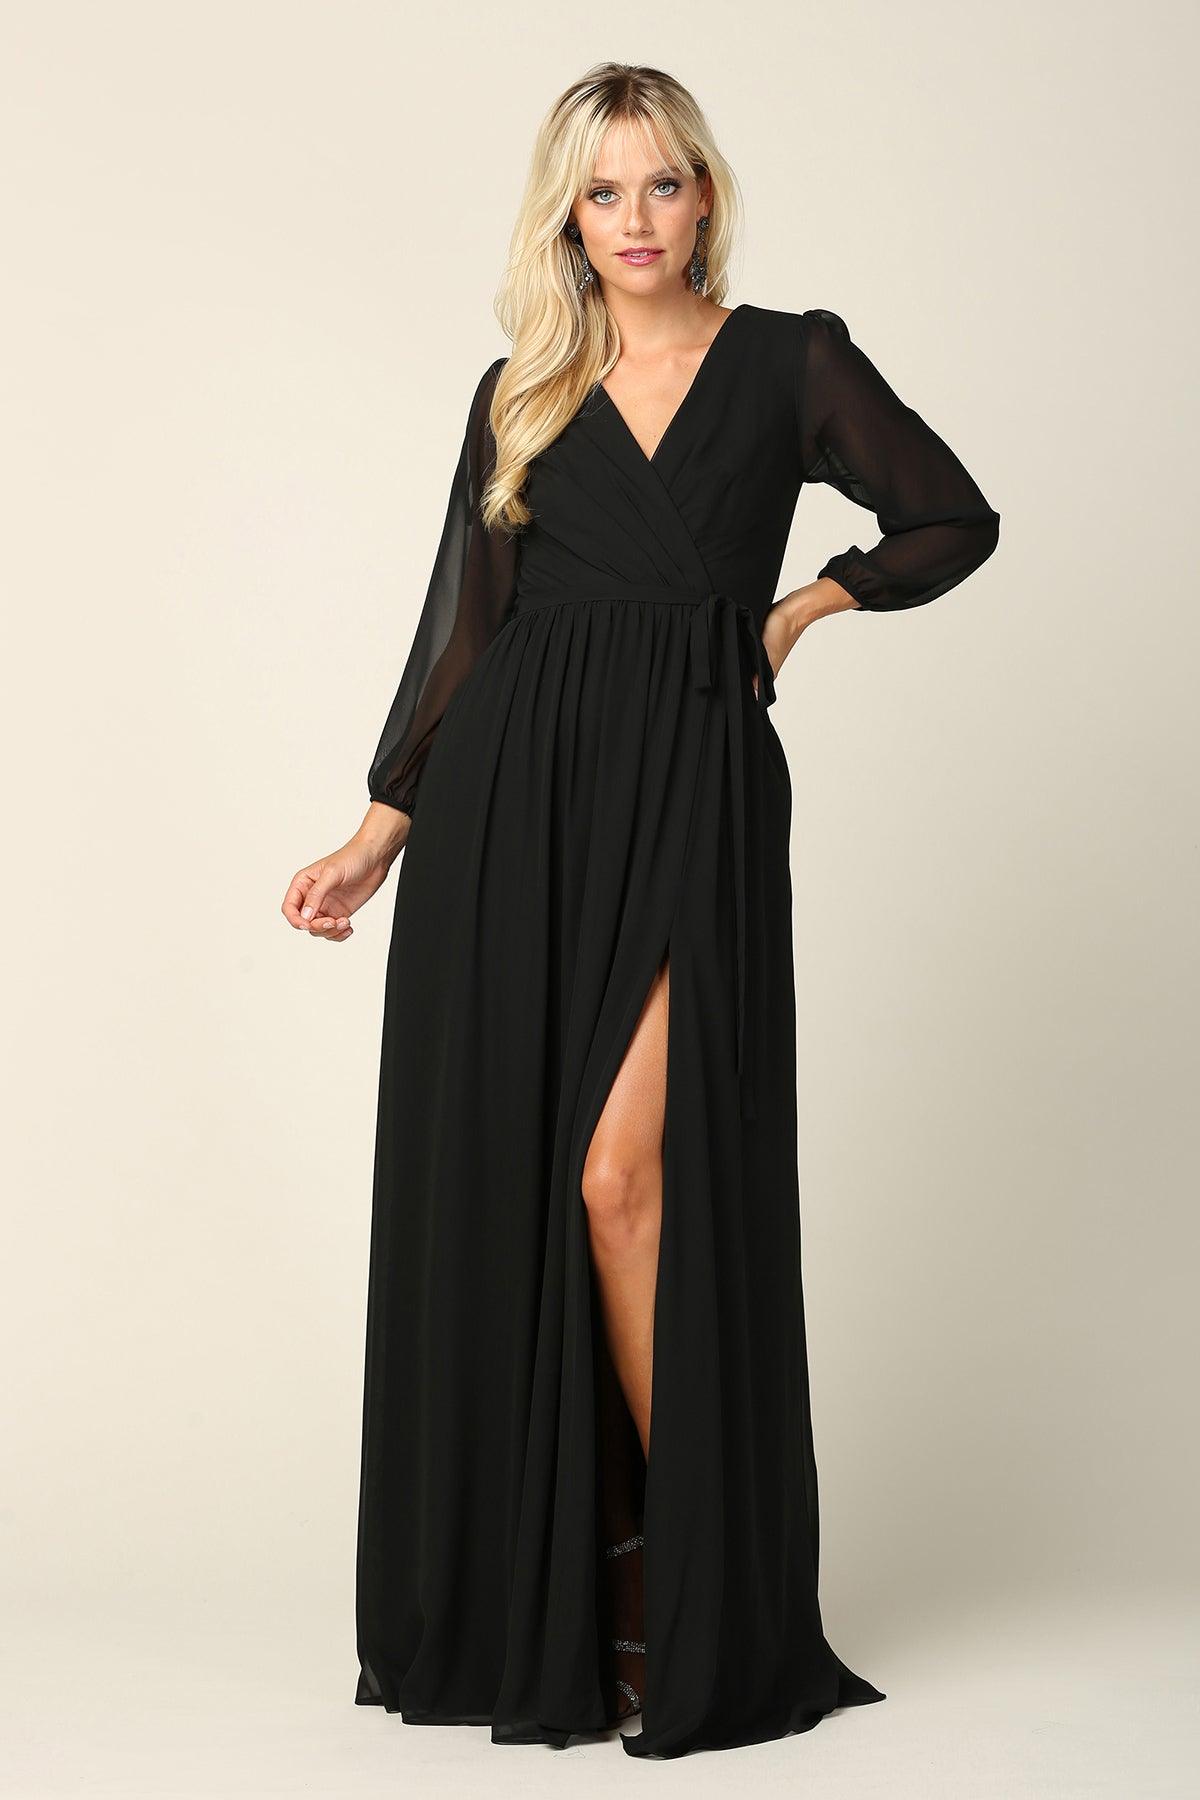 Long Sleeve Mother of the Bride Chiffon Dress | The Dress Outlet